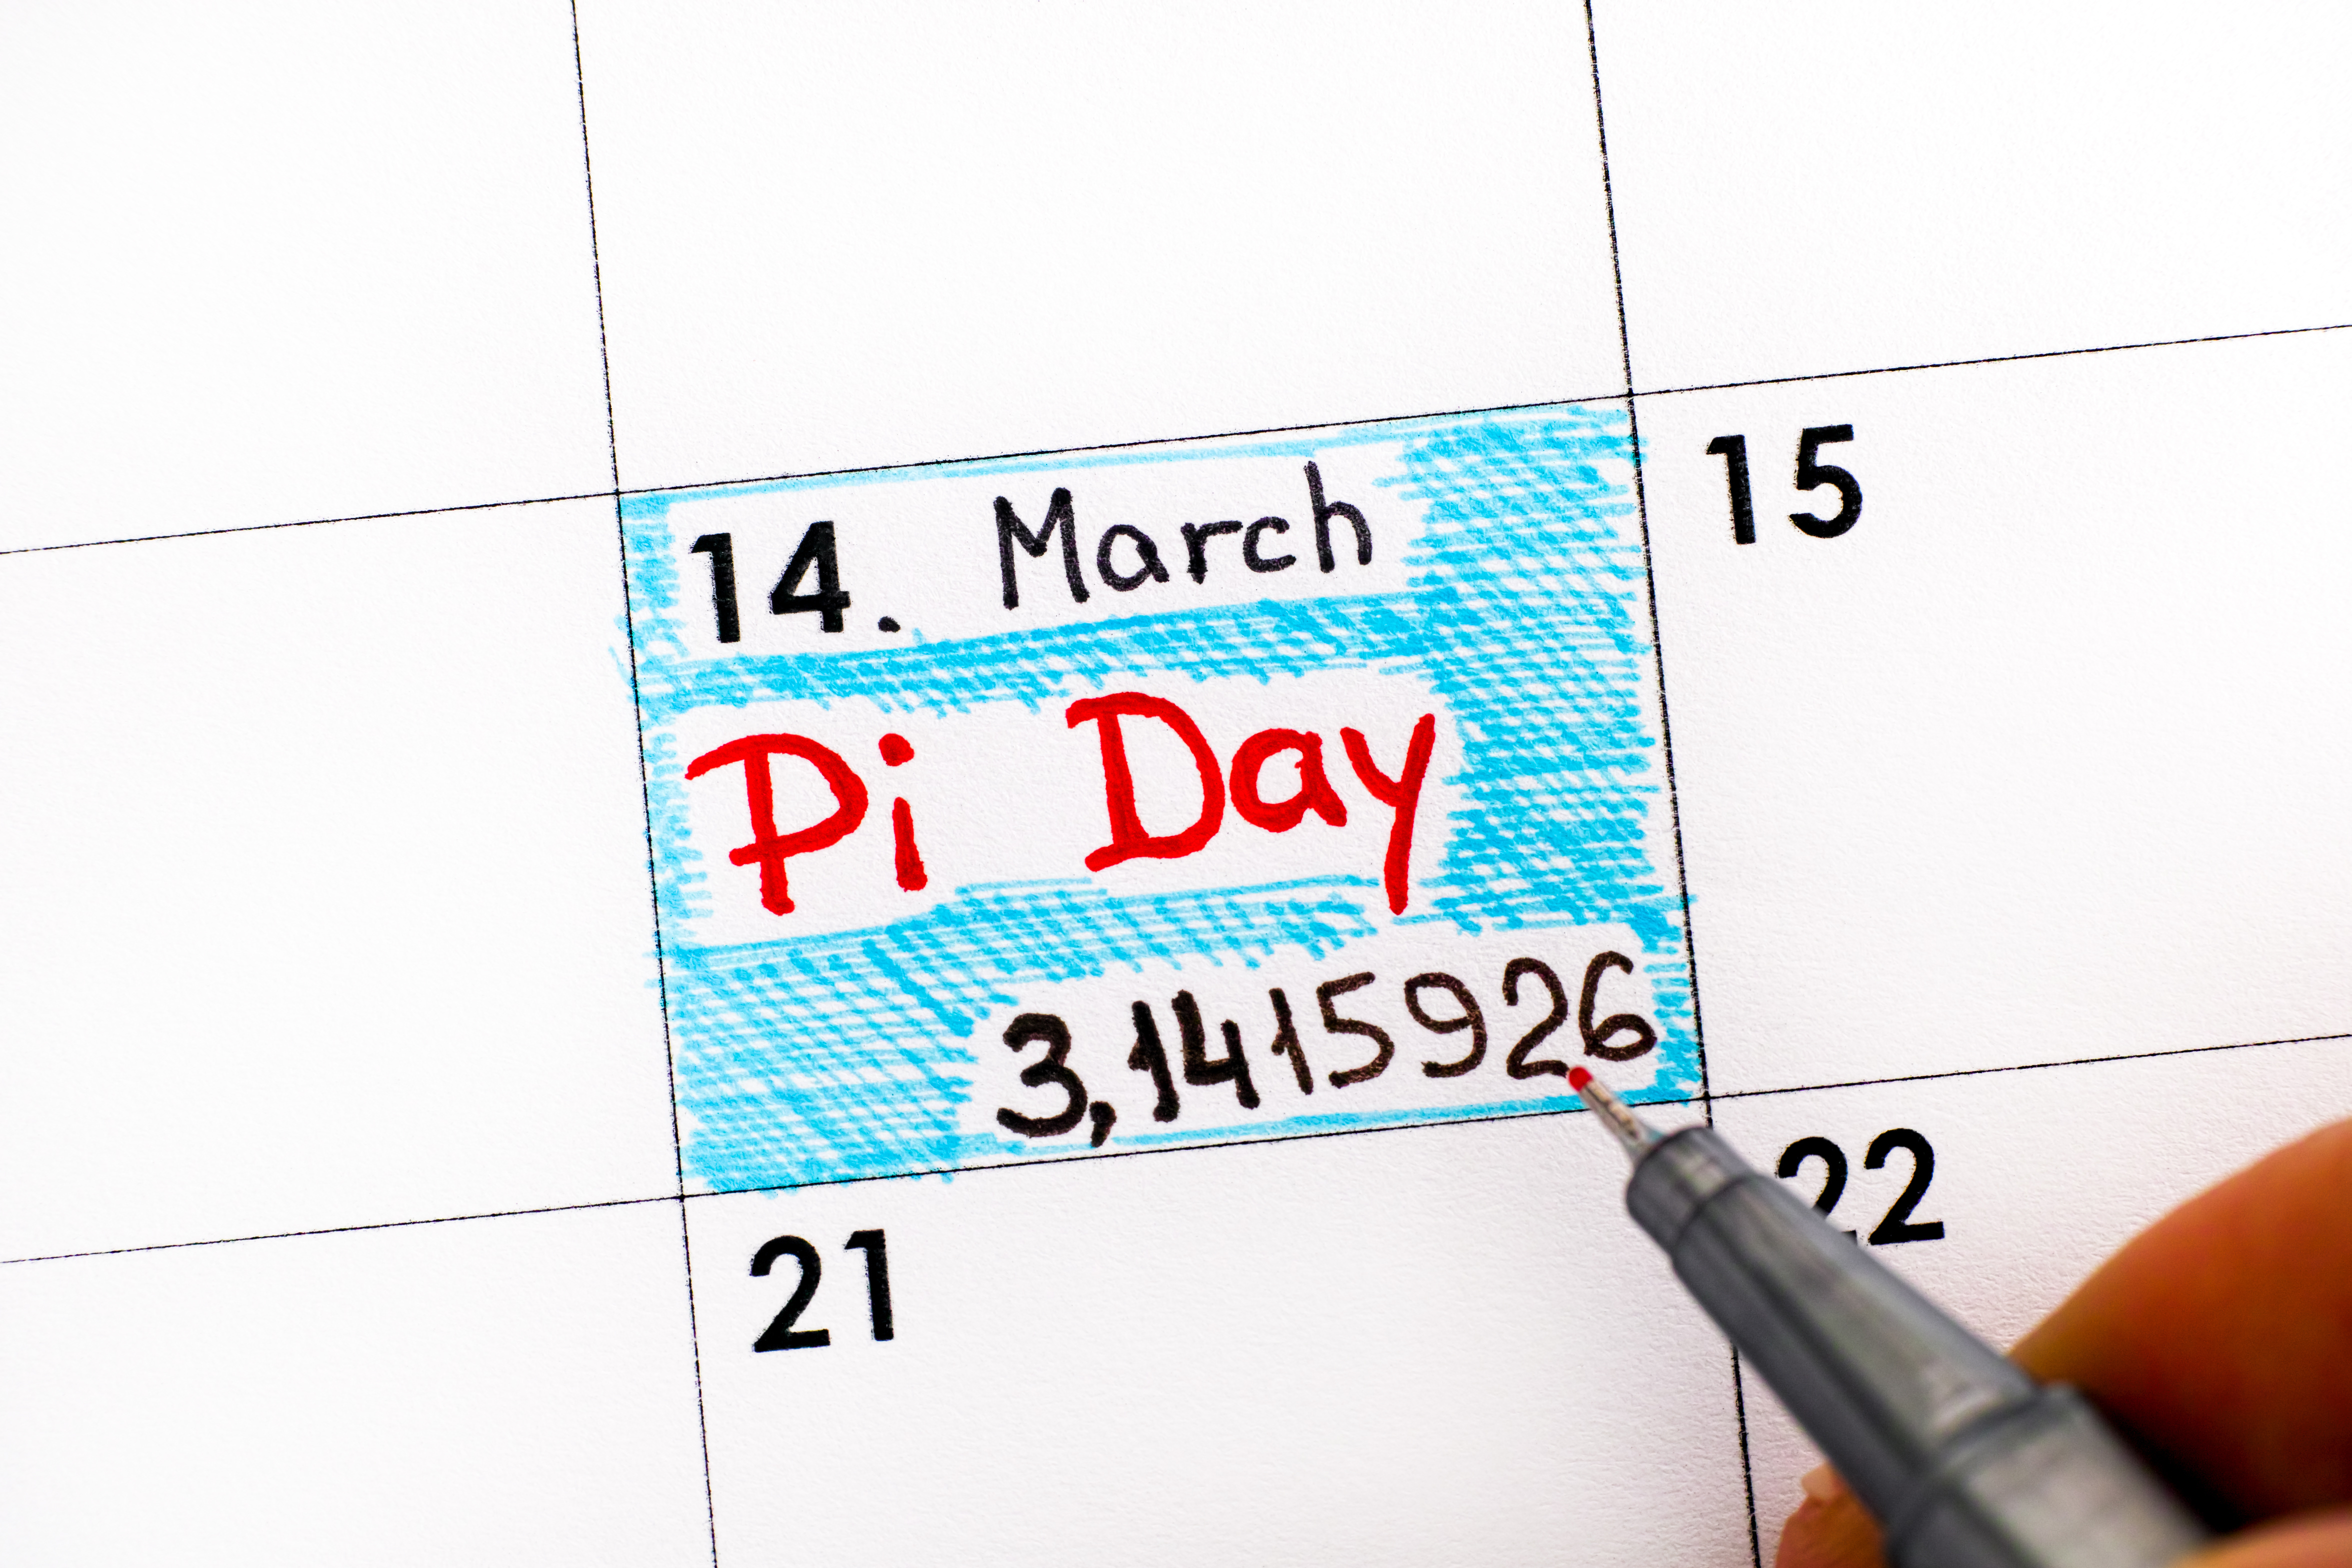 Woman fingers with pen writing reminder Pi Day in calendar. Pi Day is celebrated on March 14th around the world.